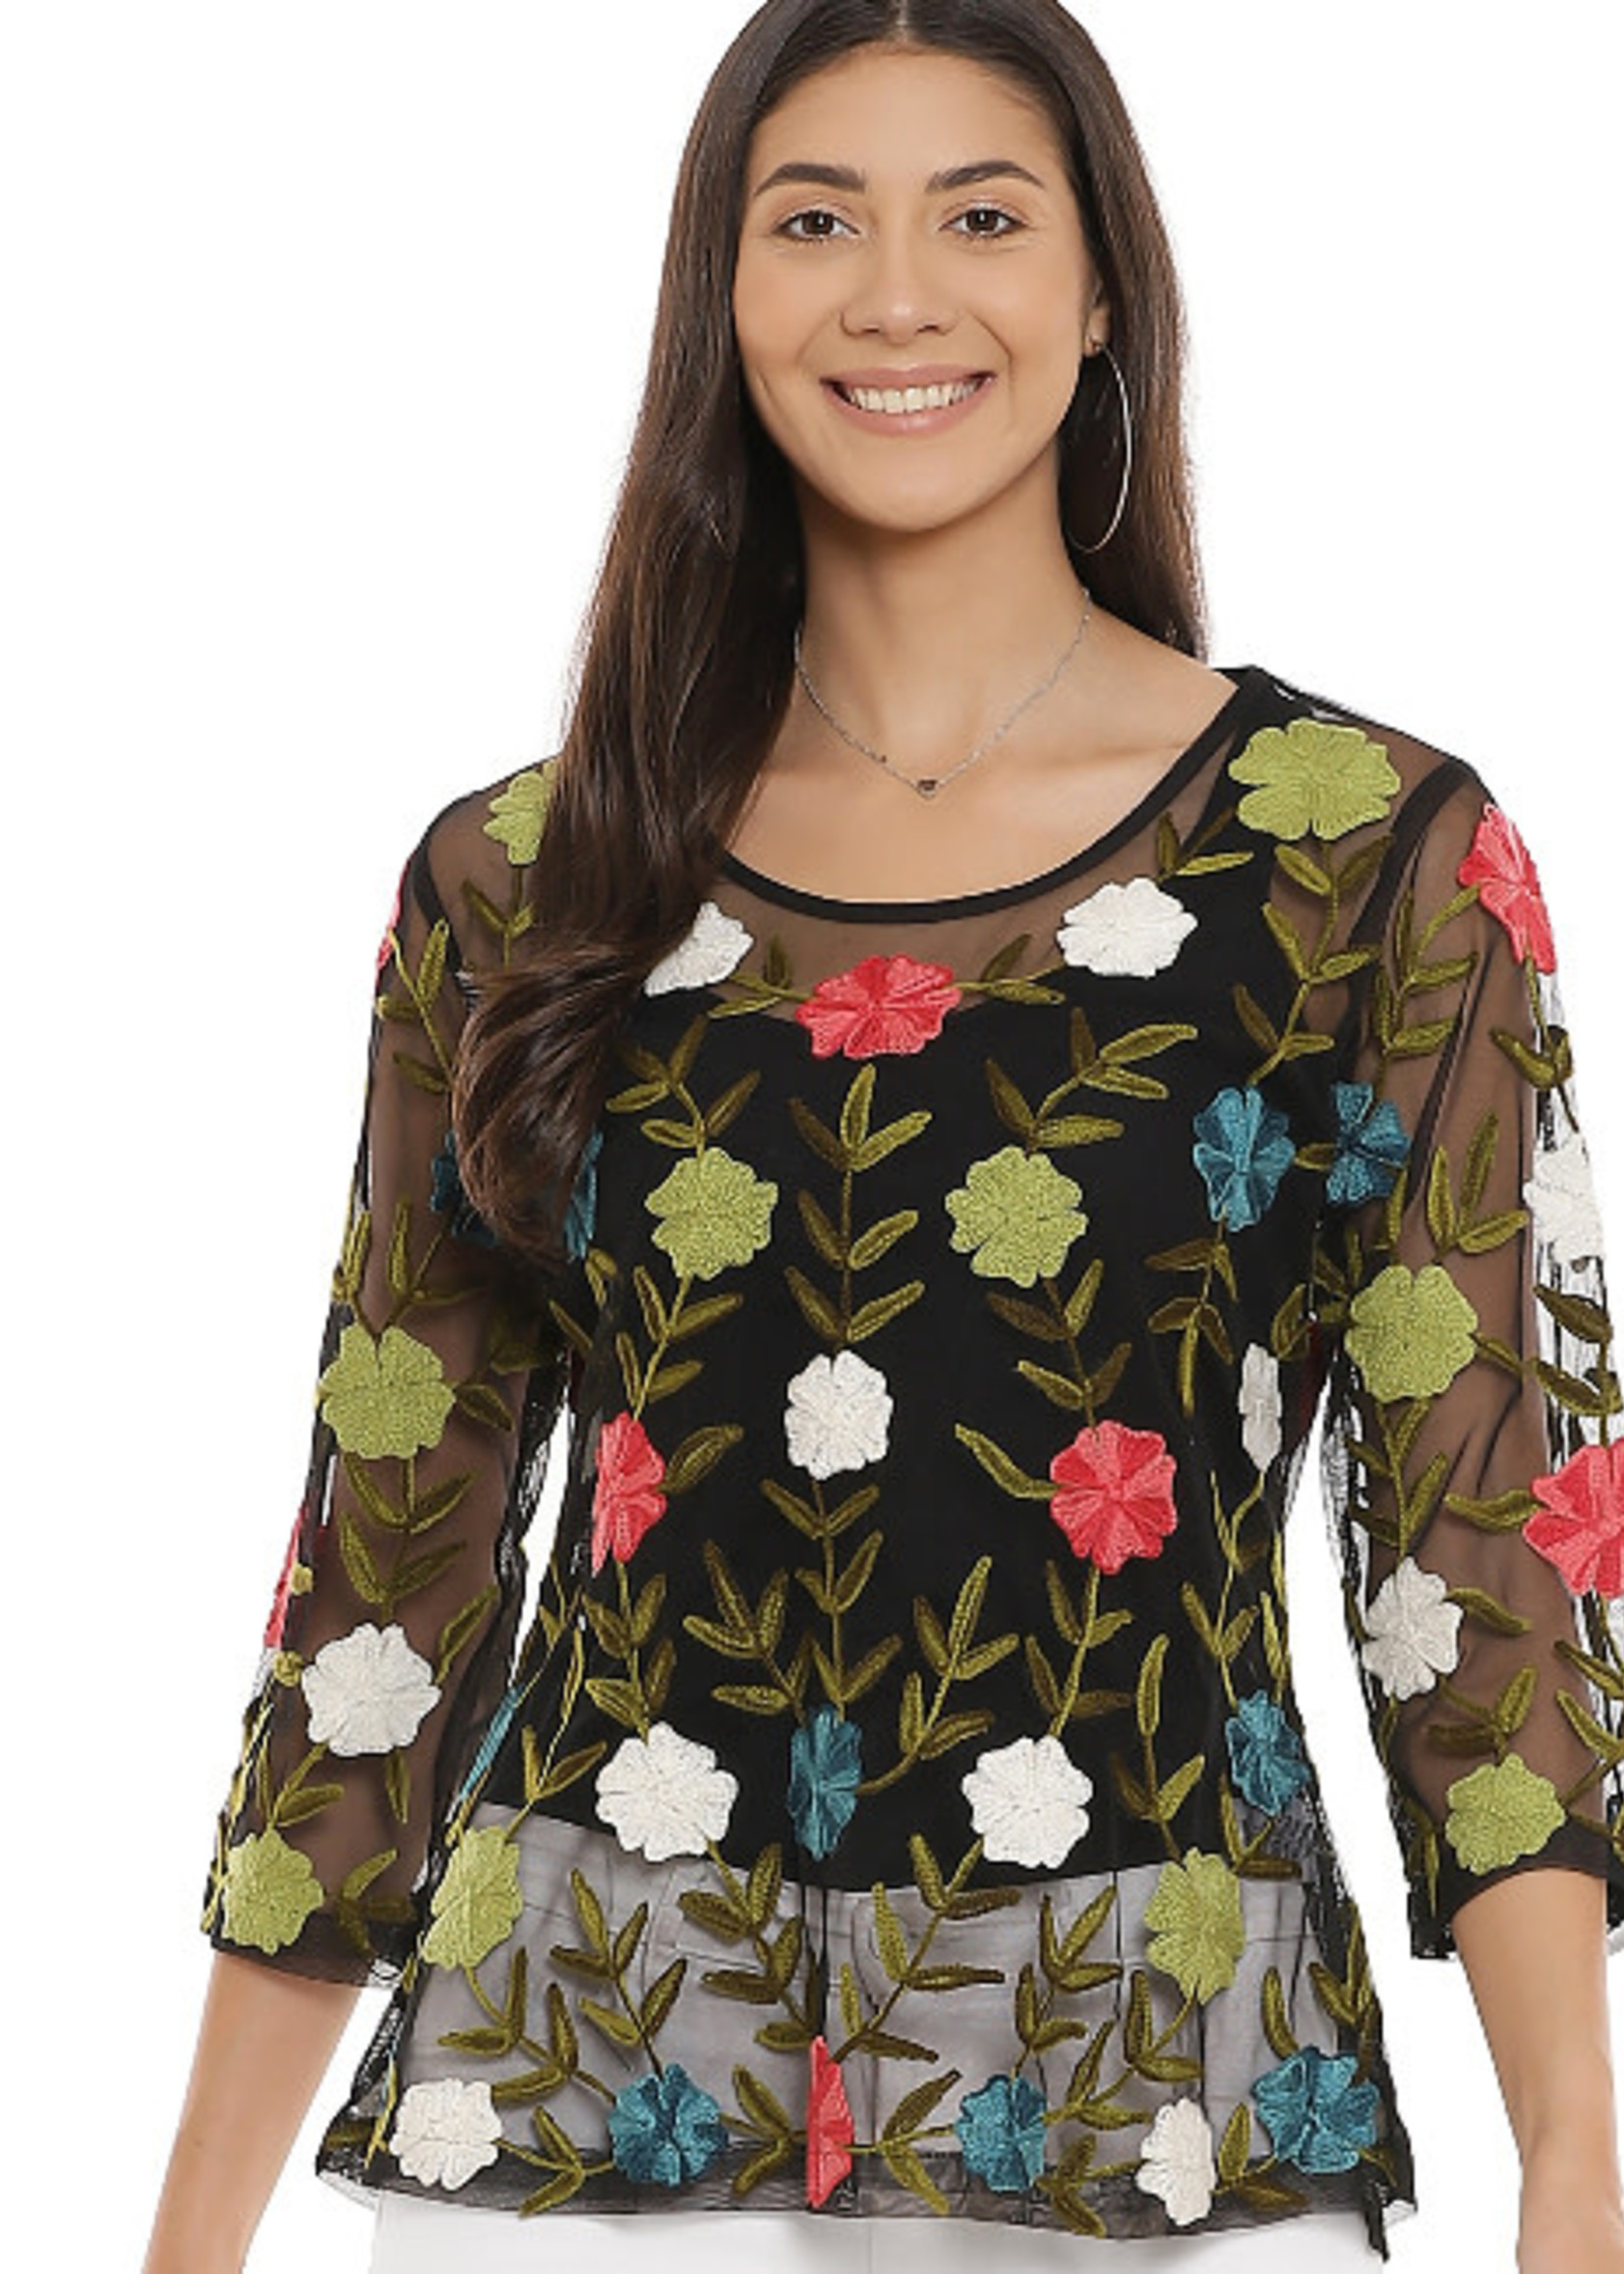 Parsley and Sage Black Sheer Embroidered Floral Top